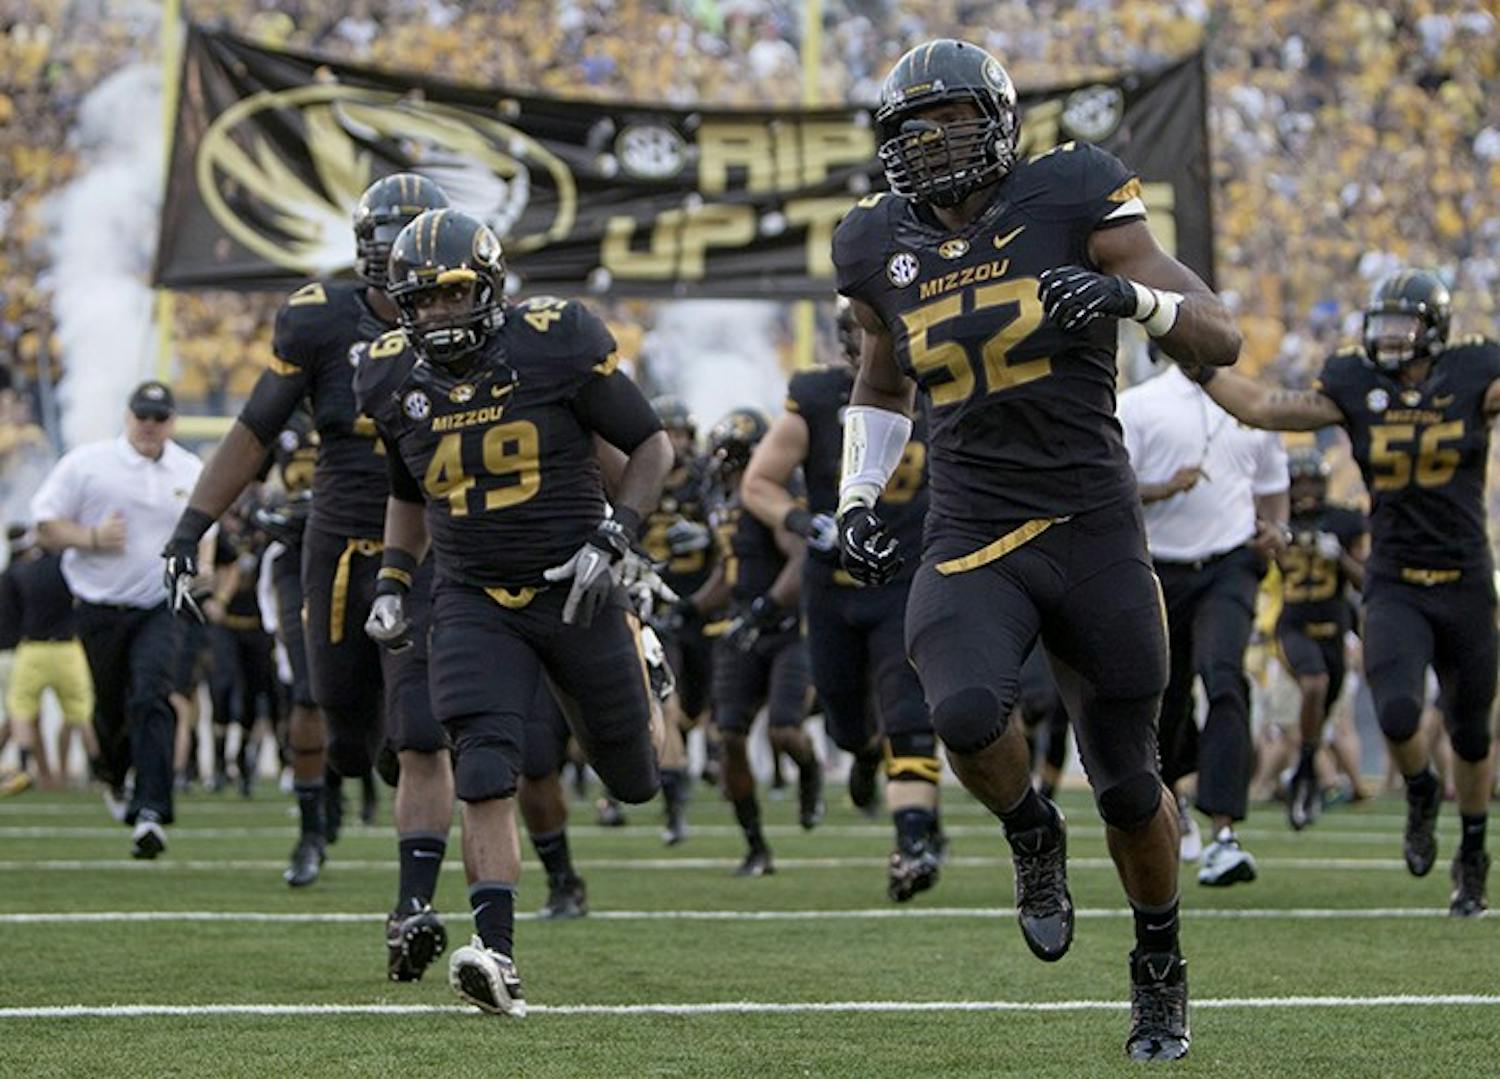 Missouri Tigers linebacker Denzel Martin (49) and defensive lineman Michael Sam (52) lead the charge onto the field at the start of the game against Murray State at Faurot Field in Columbia, Missouri, Saturday, August 31, 2013. (Shane Keyser/Kansas City Star/MCT)